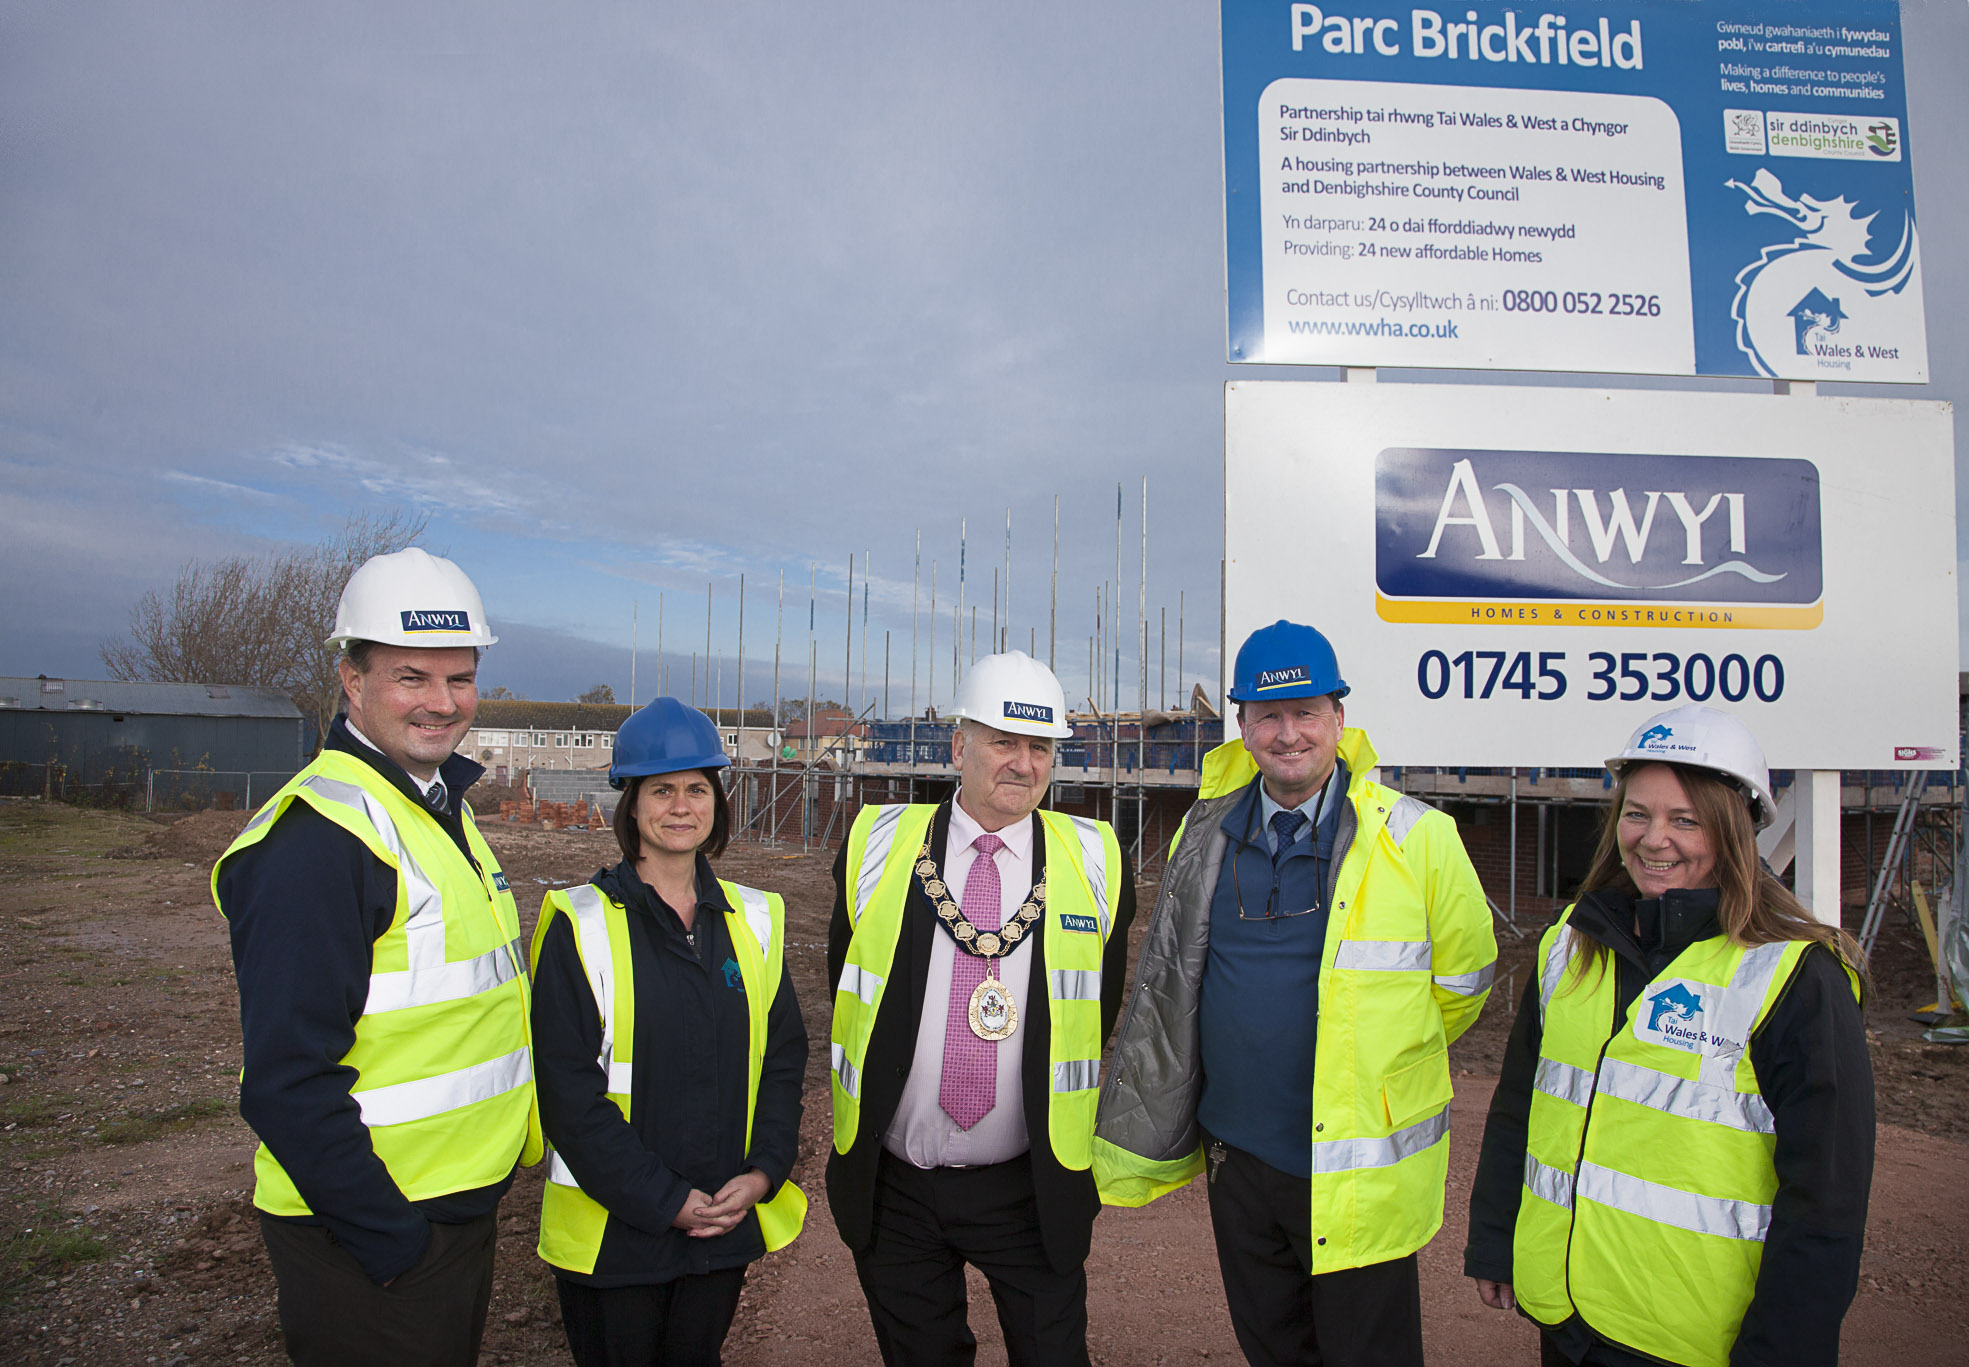 Wales and West Housing pictured at the Parc Brickfield site in Rhtl is Tom Anwyl, Managing Director of Anwyl Homes and Construction, Cath Marland Wales and West Housing officer, Cllr Brian Blakeley Chairman of Denbighshire County Council, Steve Langford Anwyl site Manager and Cate (CORRECT) Porter WWHA